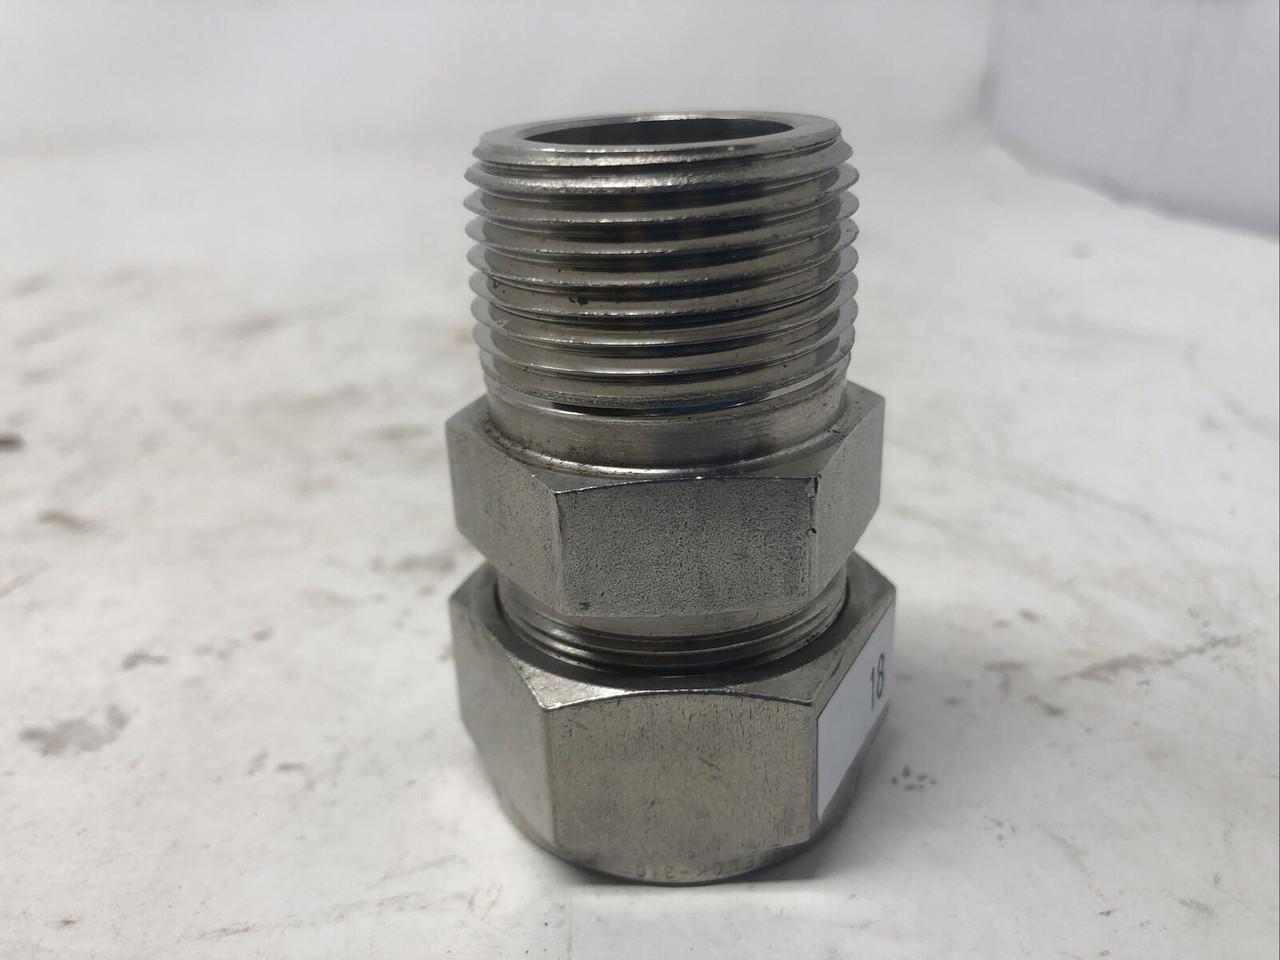 SWAGELOK FITTING 1 1/4 THREADED TO 1" COMPRESSION - PREOWNED